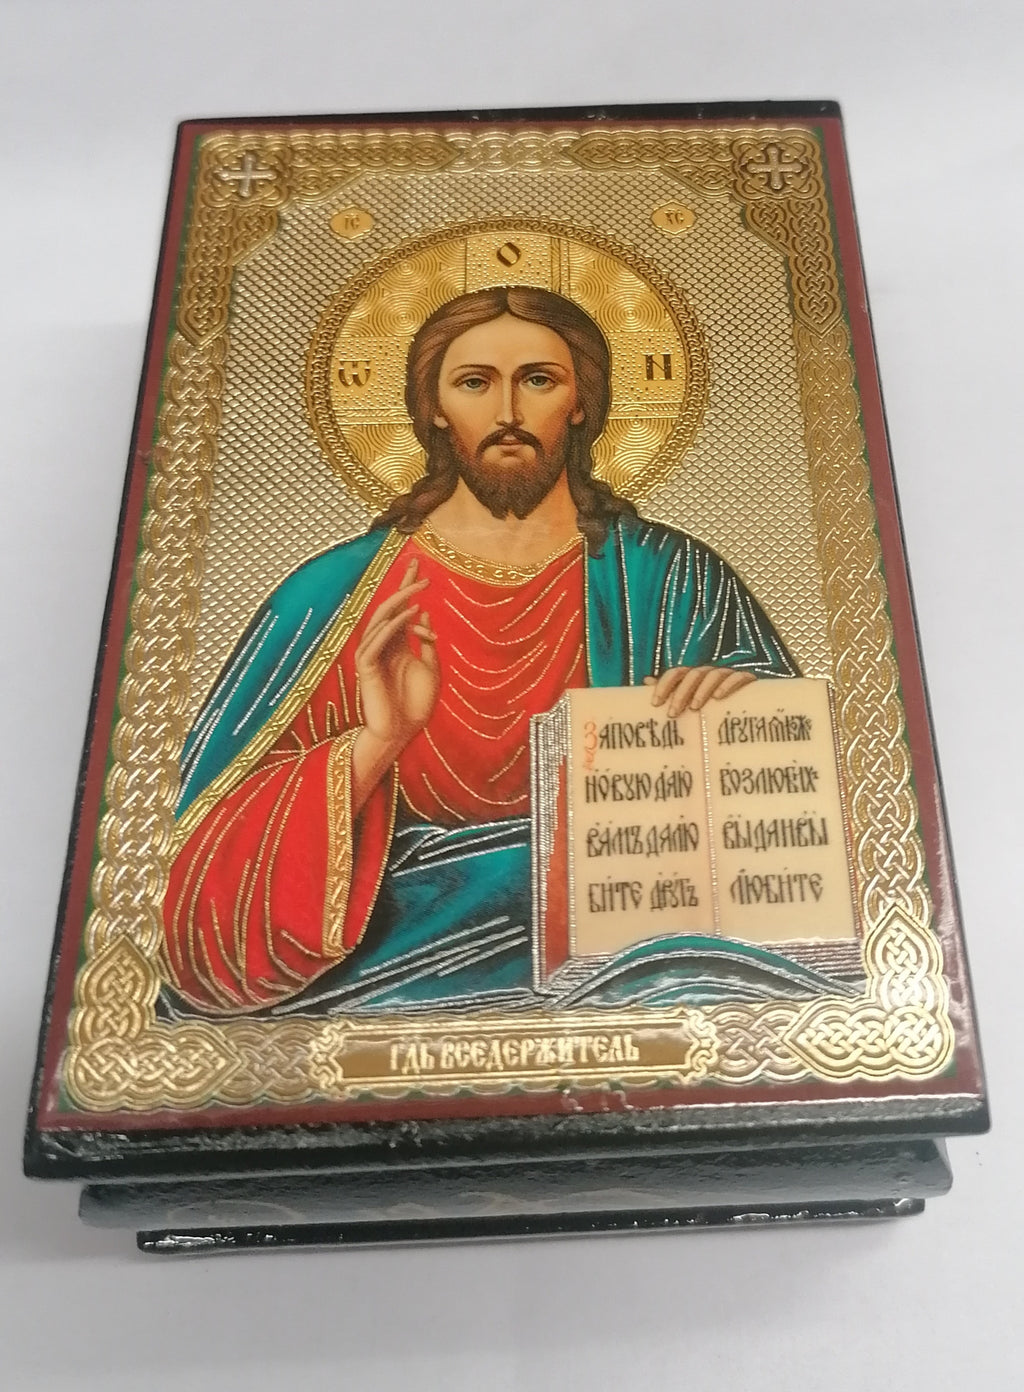 Our Lord God religious hand made wooden storage box.